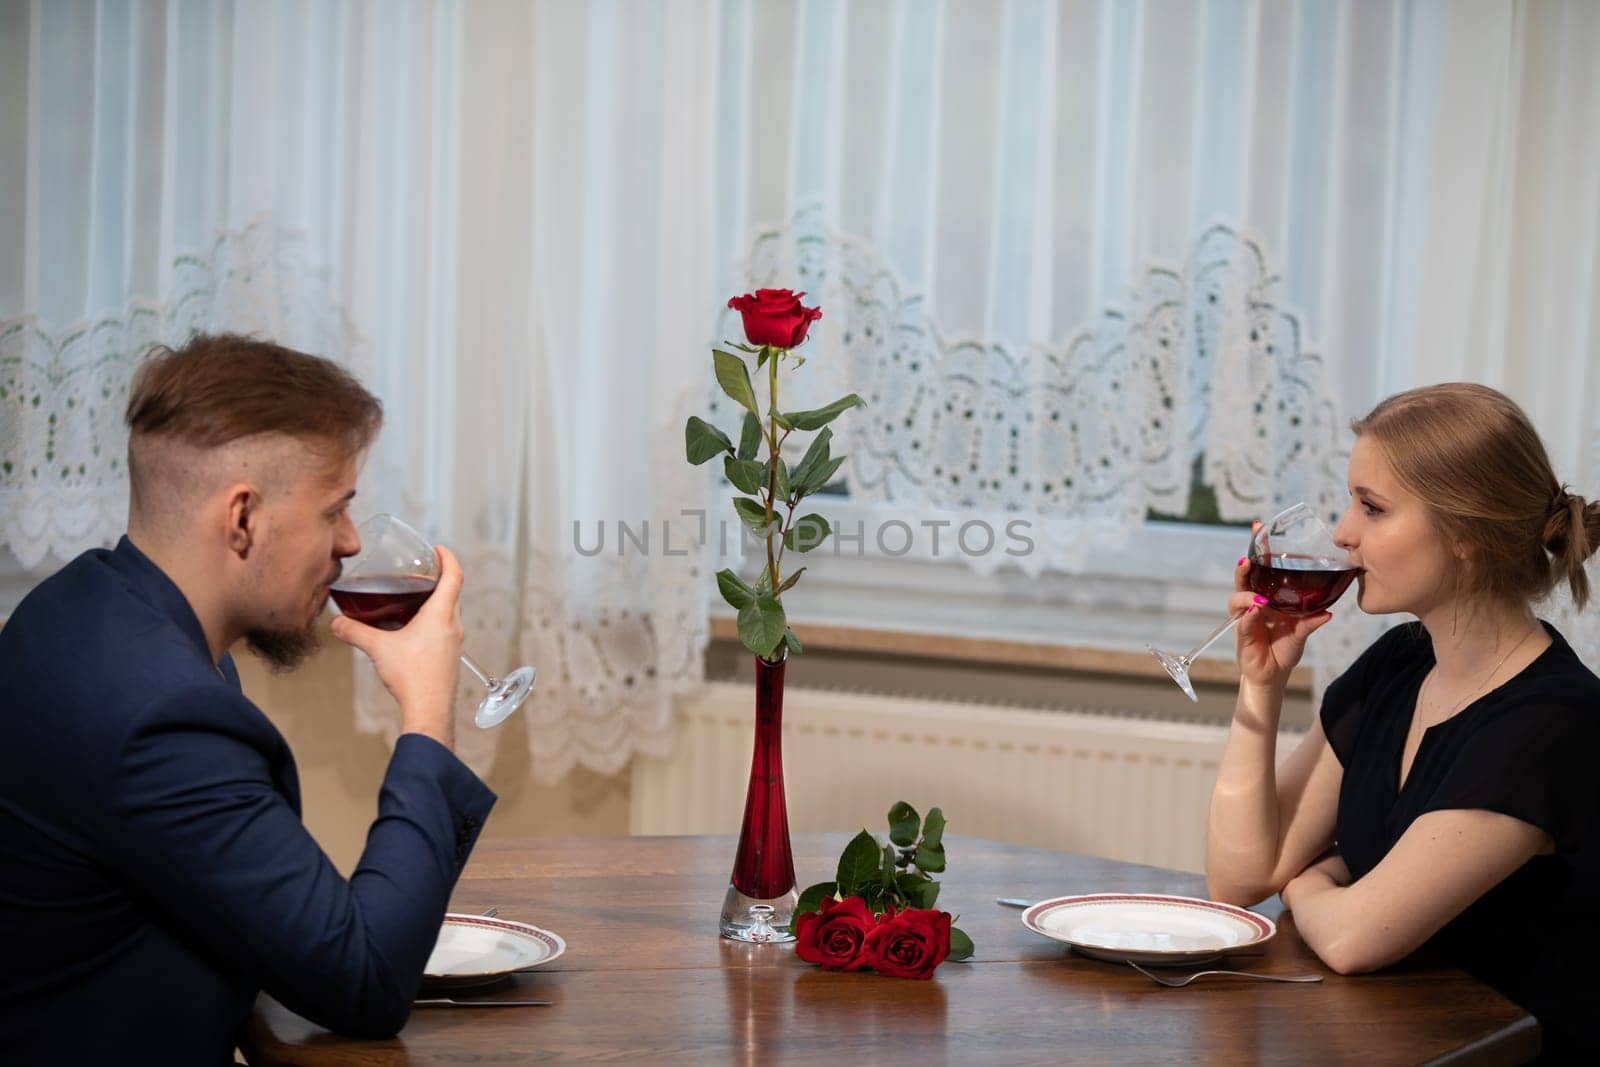 A man and a woman drink red wine from glasses. They are sitting at the table. There are empty plates in front of them. Celebrating an important occasion in formal clothes.